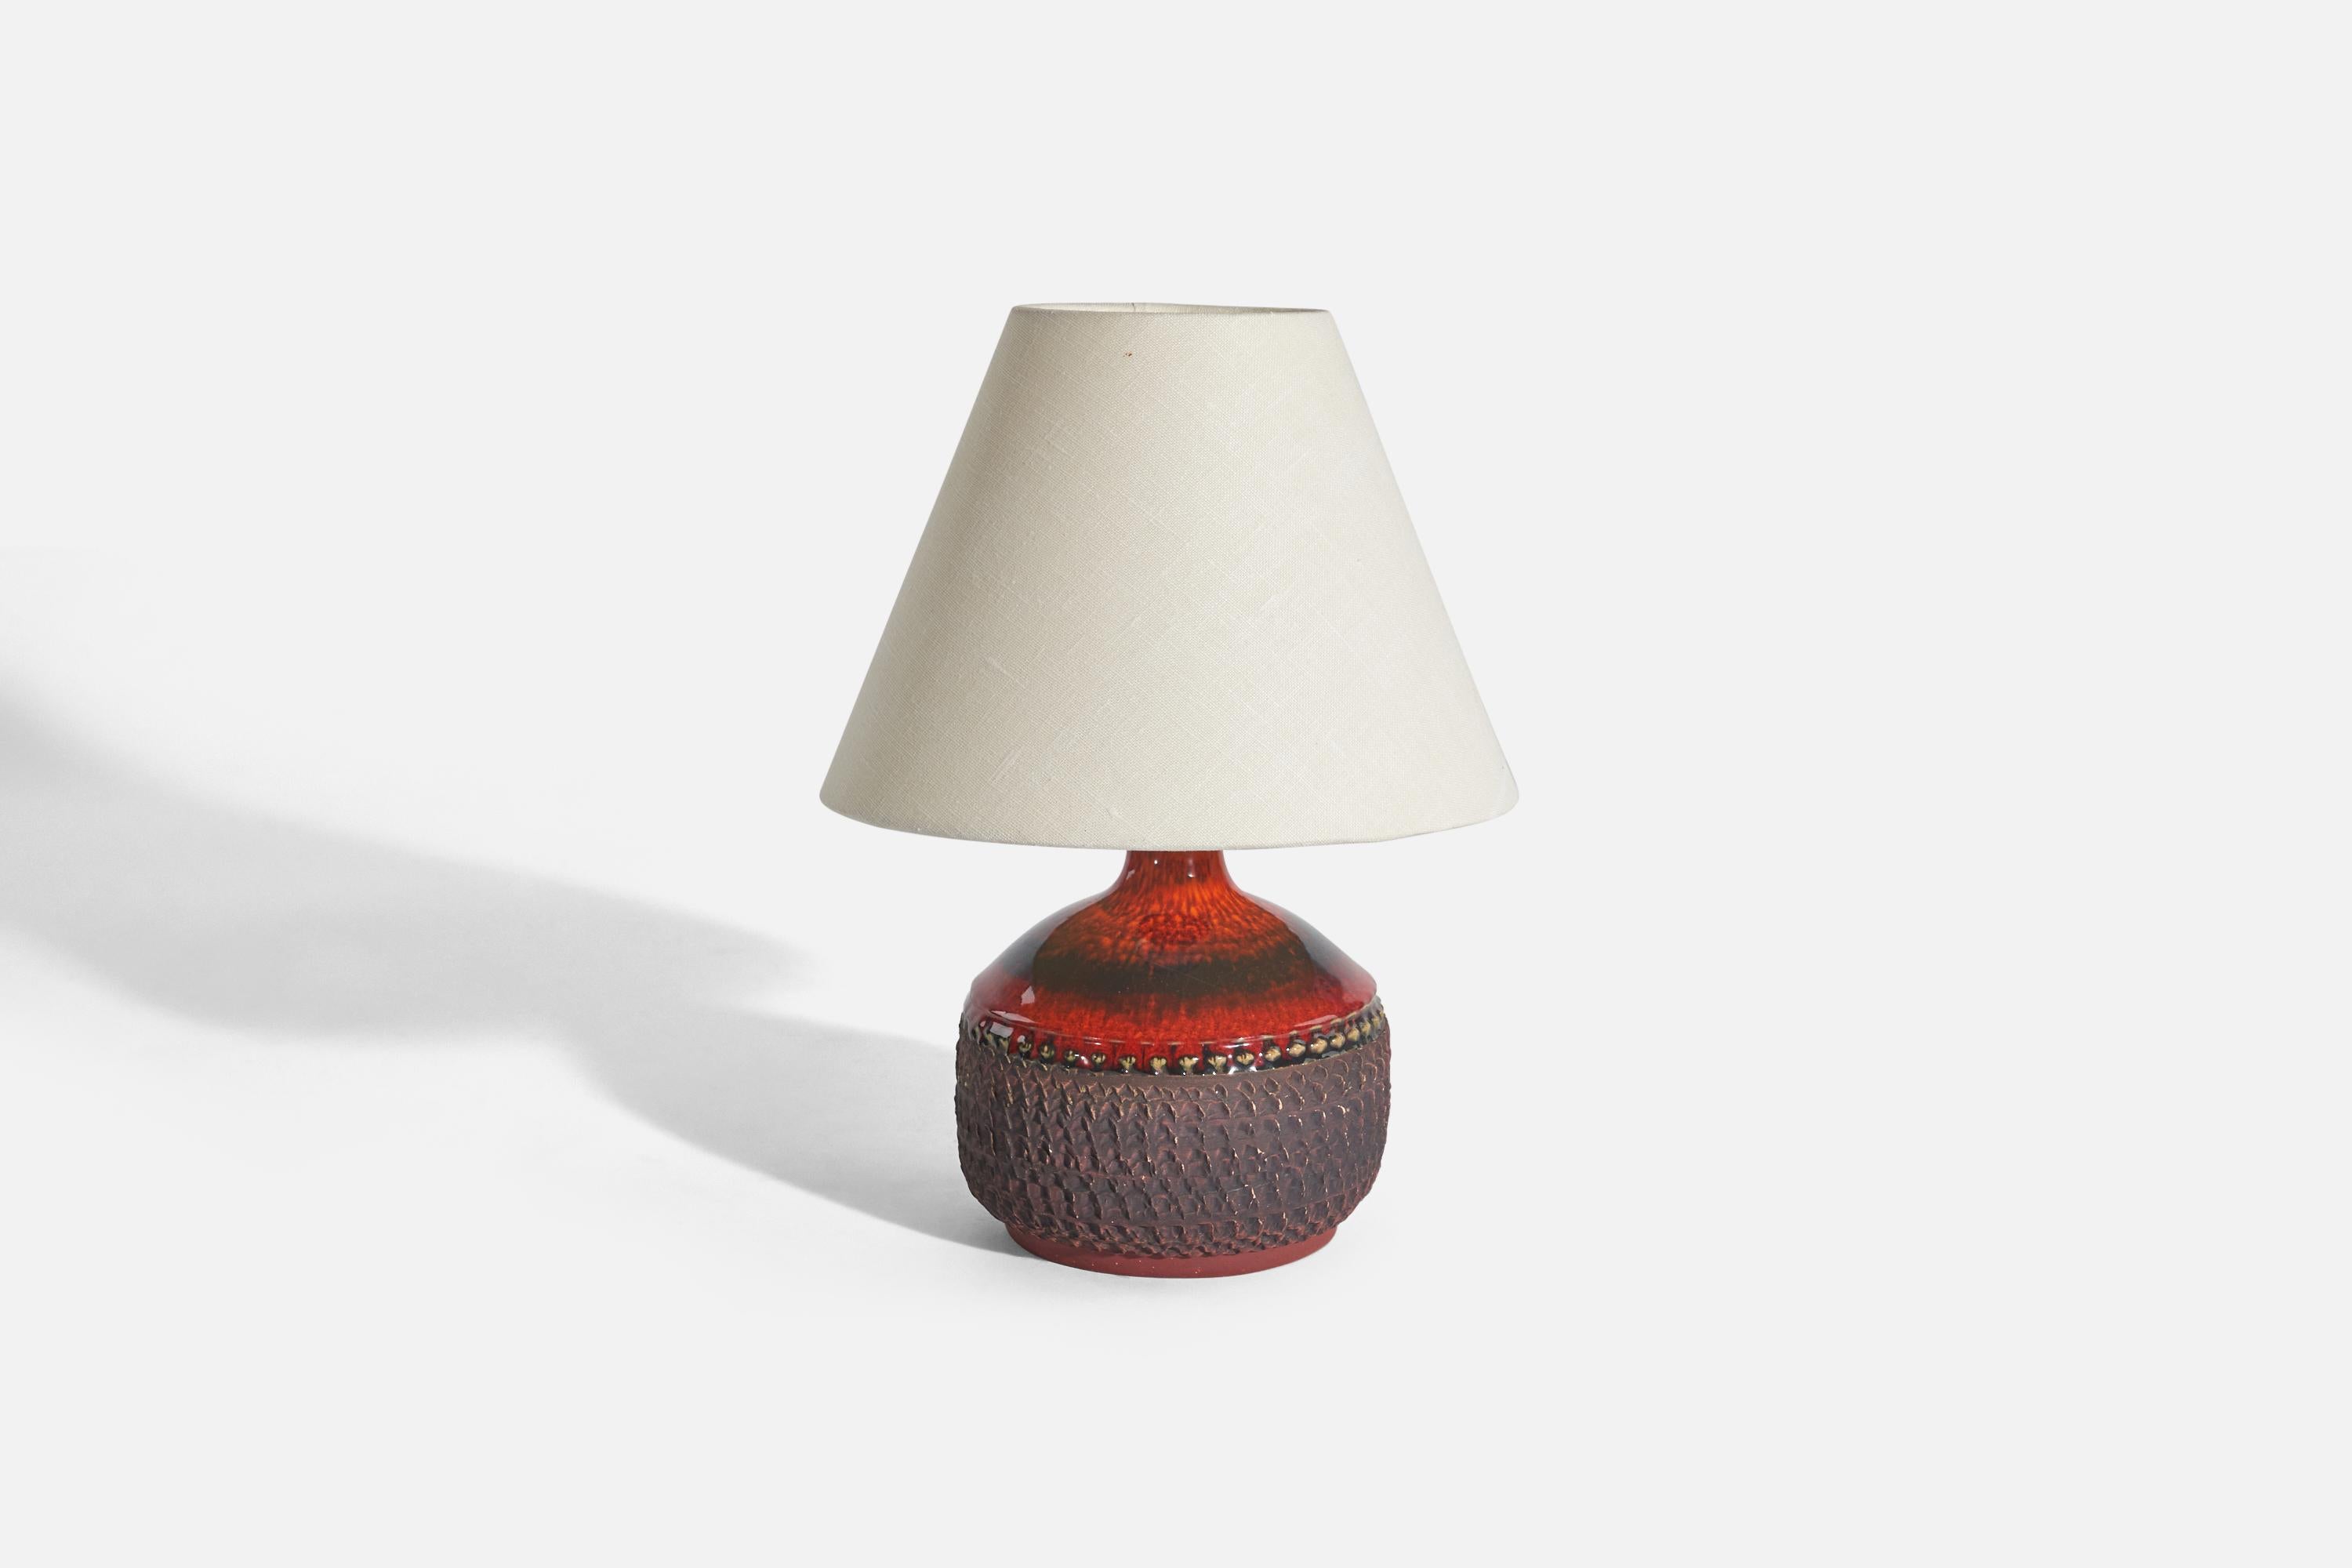 Mid-Century Modern Klase Höganäs, Table Lamp, Red and Brown-Glazed Stoneware, Sweden, 1960s For Sale